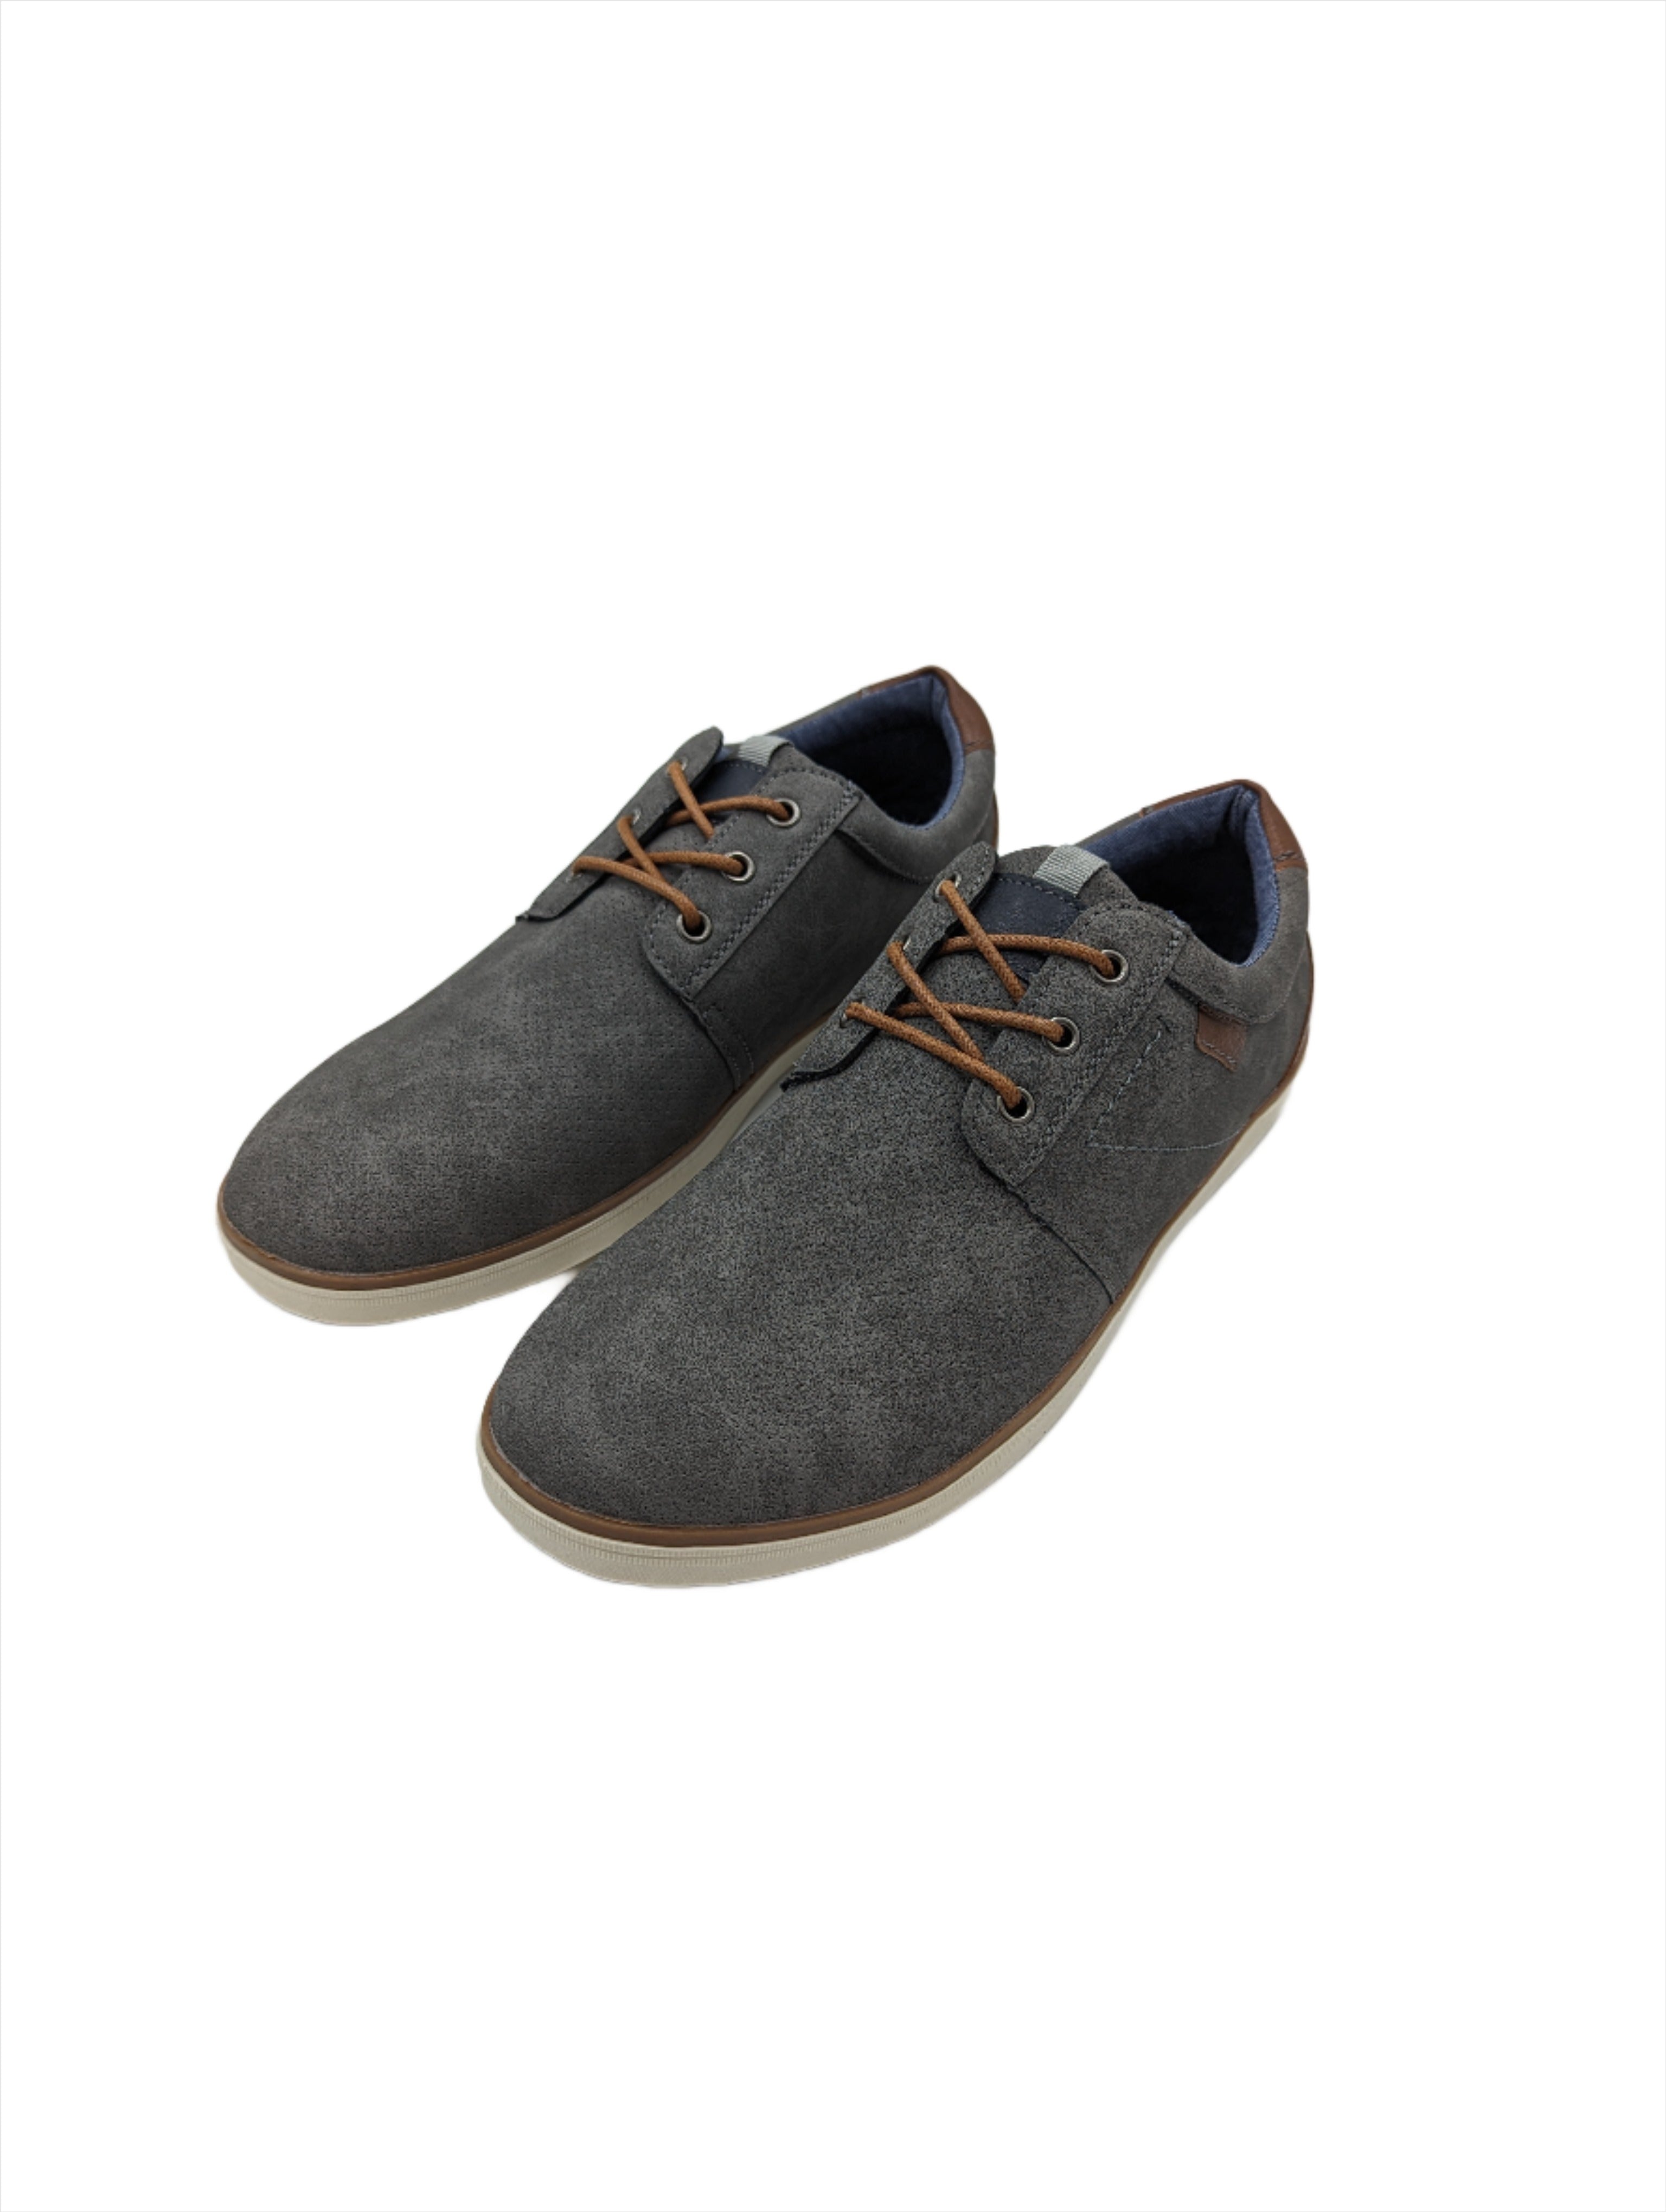 Arno Grey Lace Up Shoe-Front view